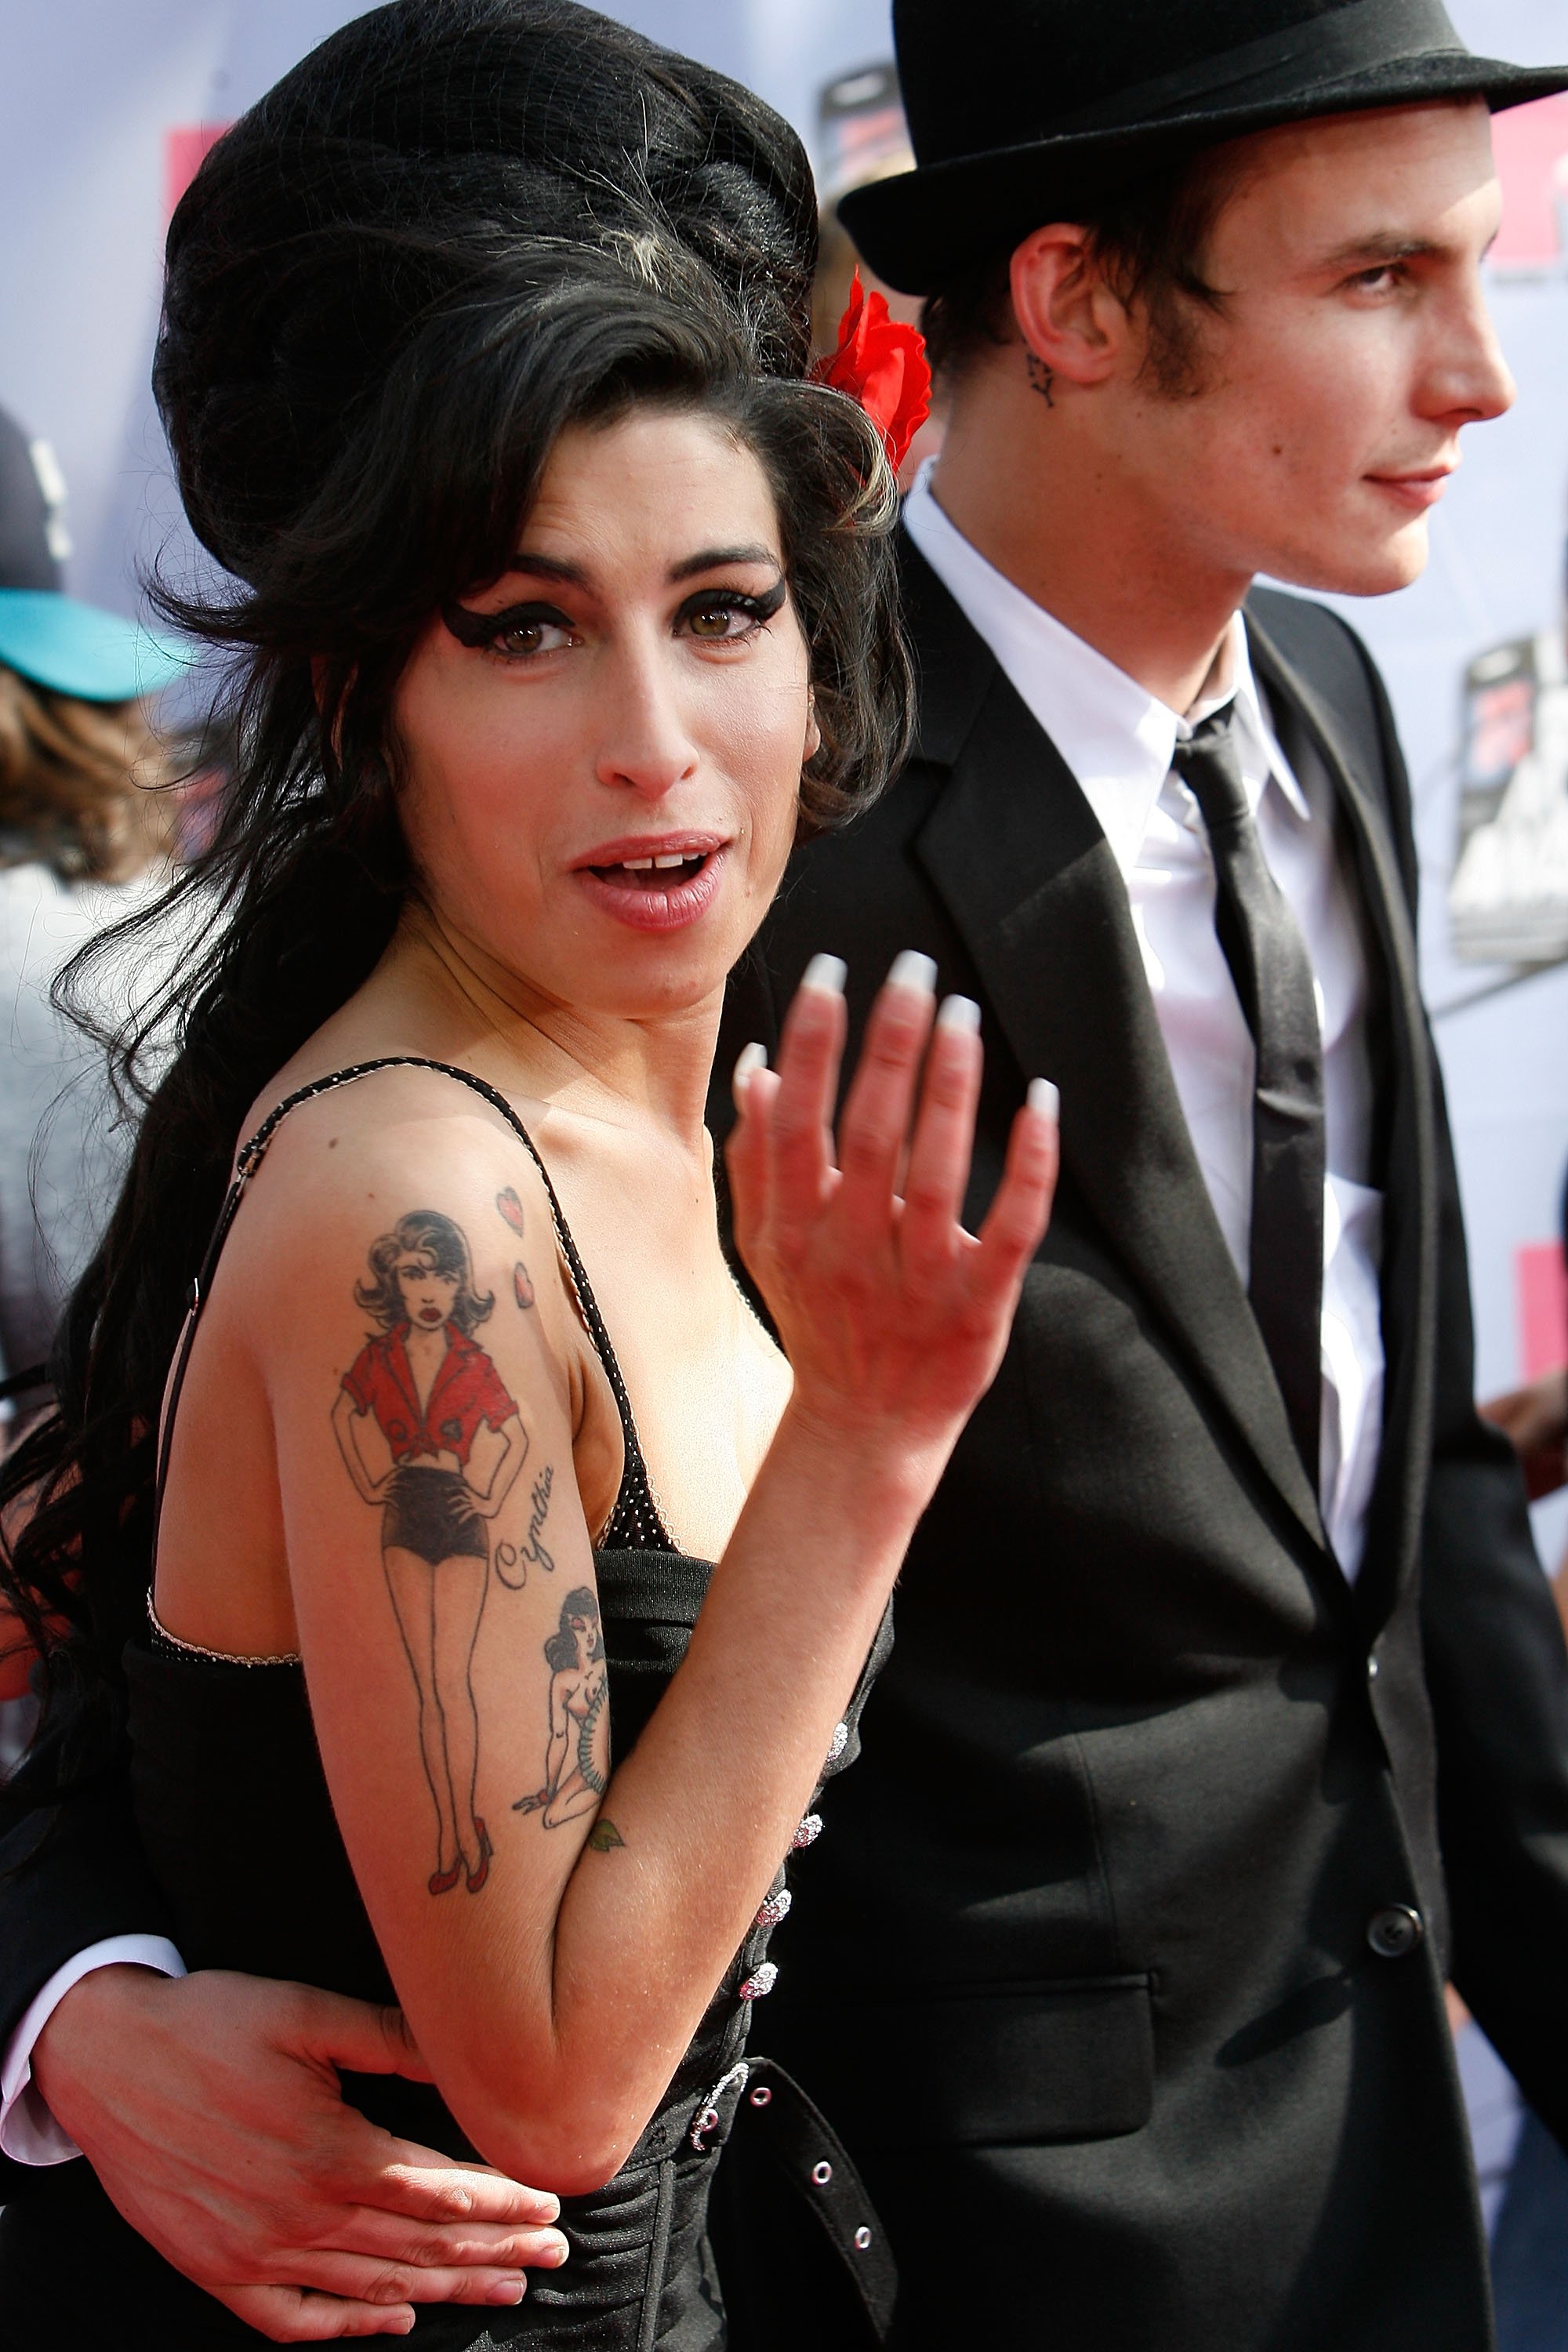 Amy Winehouse and Blake Fielder-Civil arrive to the 2007 MTV Movie Awards at the Gibson Amphitheatre on June 3, 2007 in Universal City, California | Photo: Getty Images